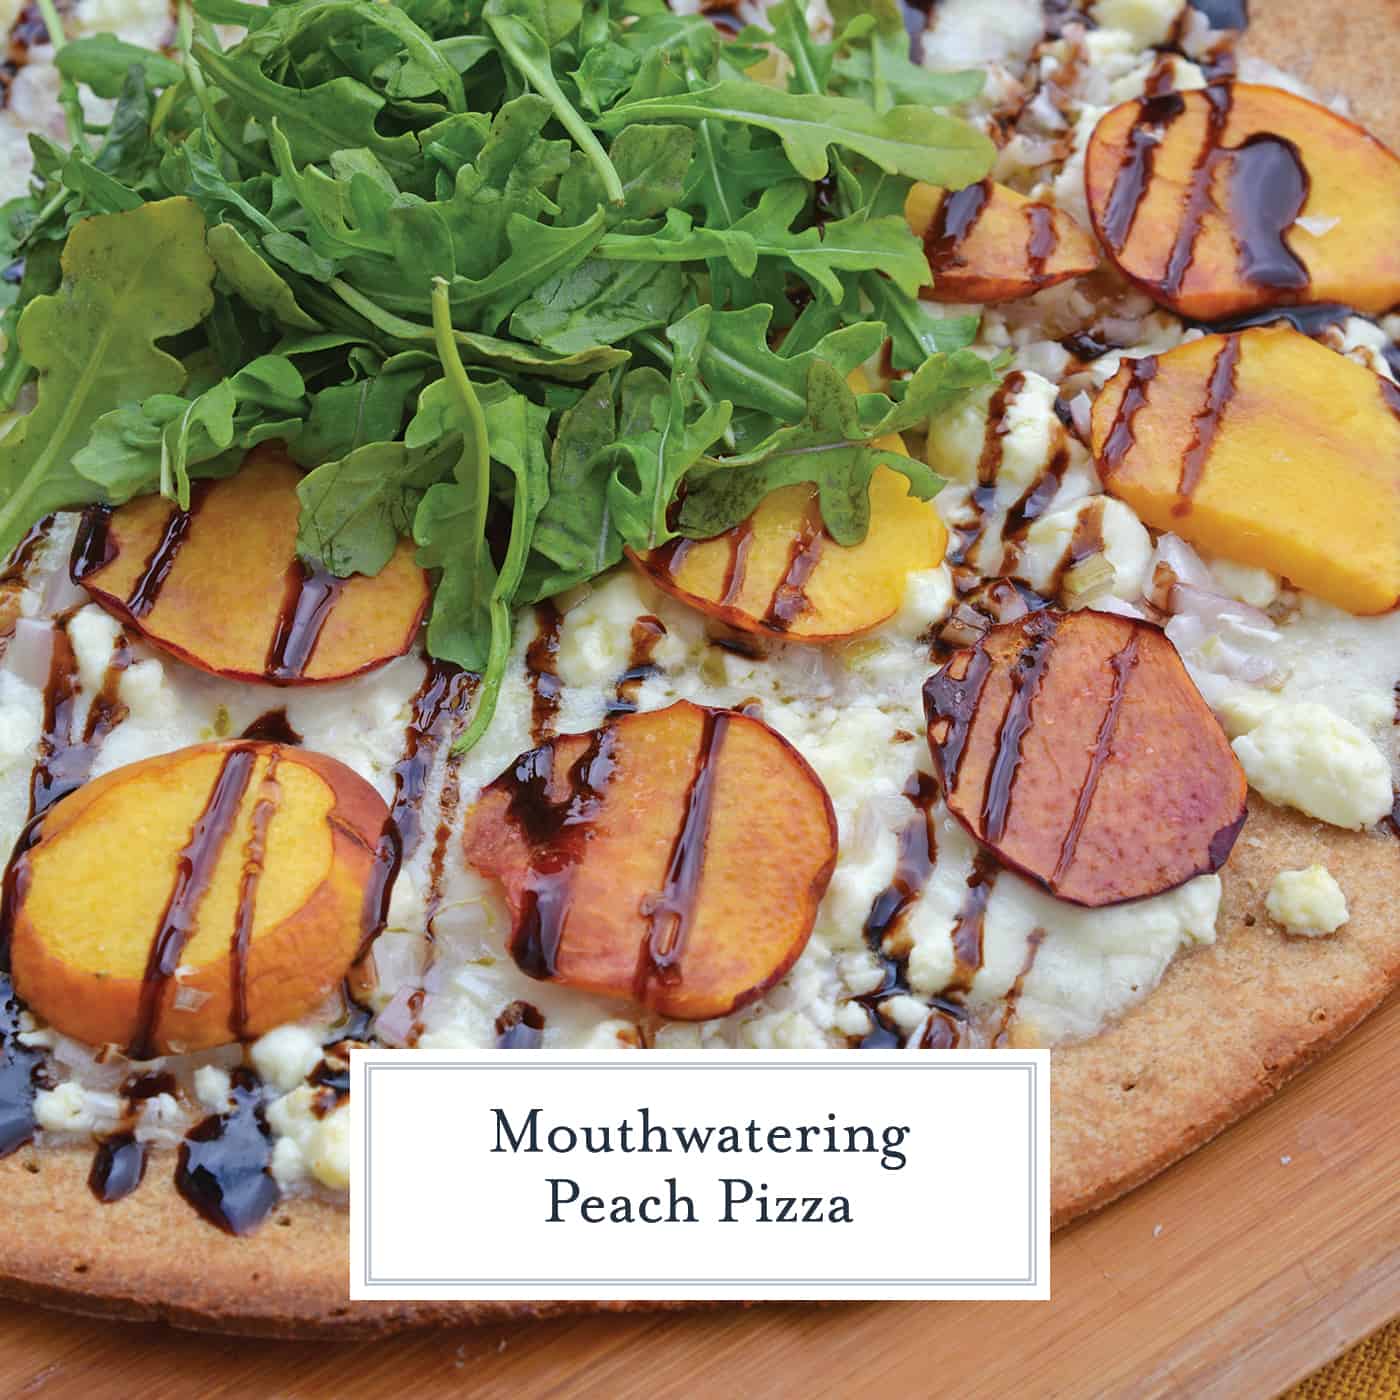 Peach Pizza is a delicious pizza variation that uses fresh peaches, melty mozzarella and gorgonzola cheeses and a sweet balsamic reduction sauce. The best homemade pizza recipe! #homemadepizzarecipe www.savoryexperiments.com